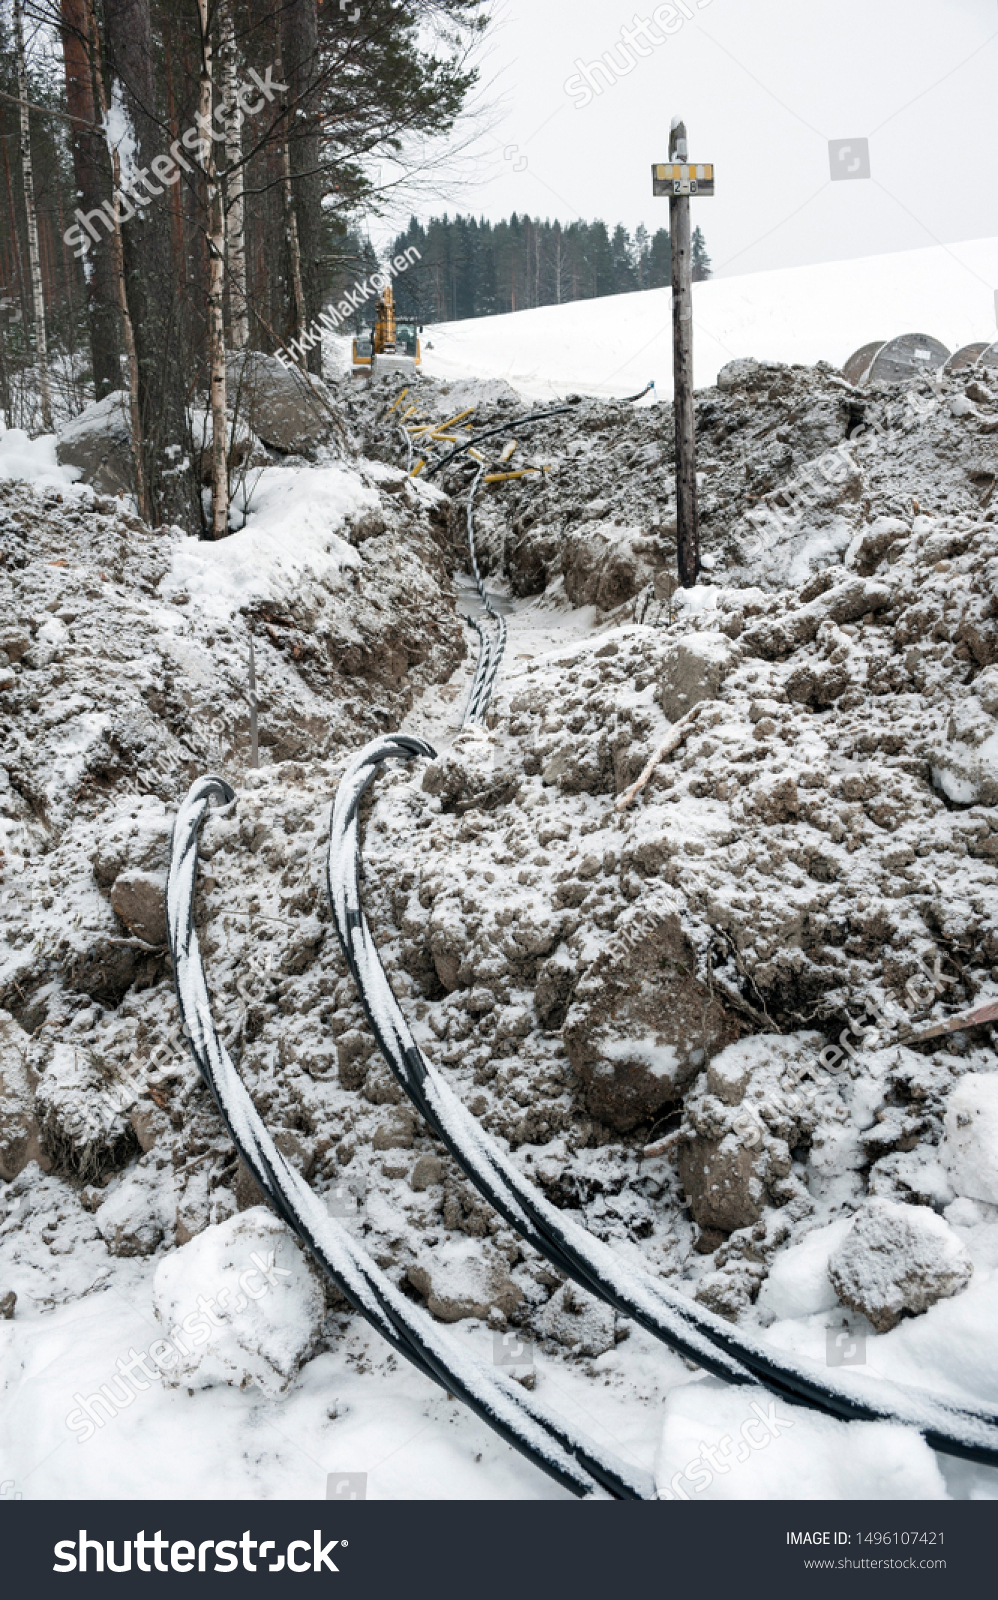 Laying a fiber optic and electricity cables in the frozen ground, buried cables for fast internet in rural region - underground cabling in Finland #1496107421